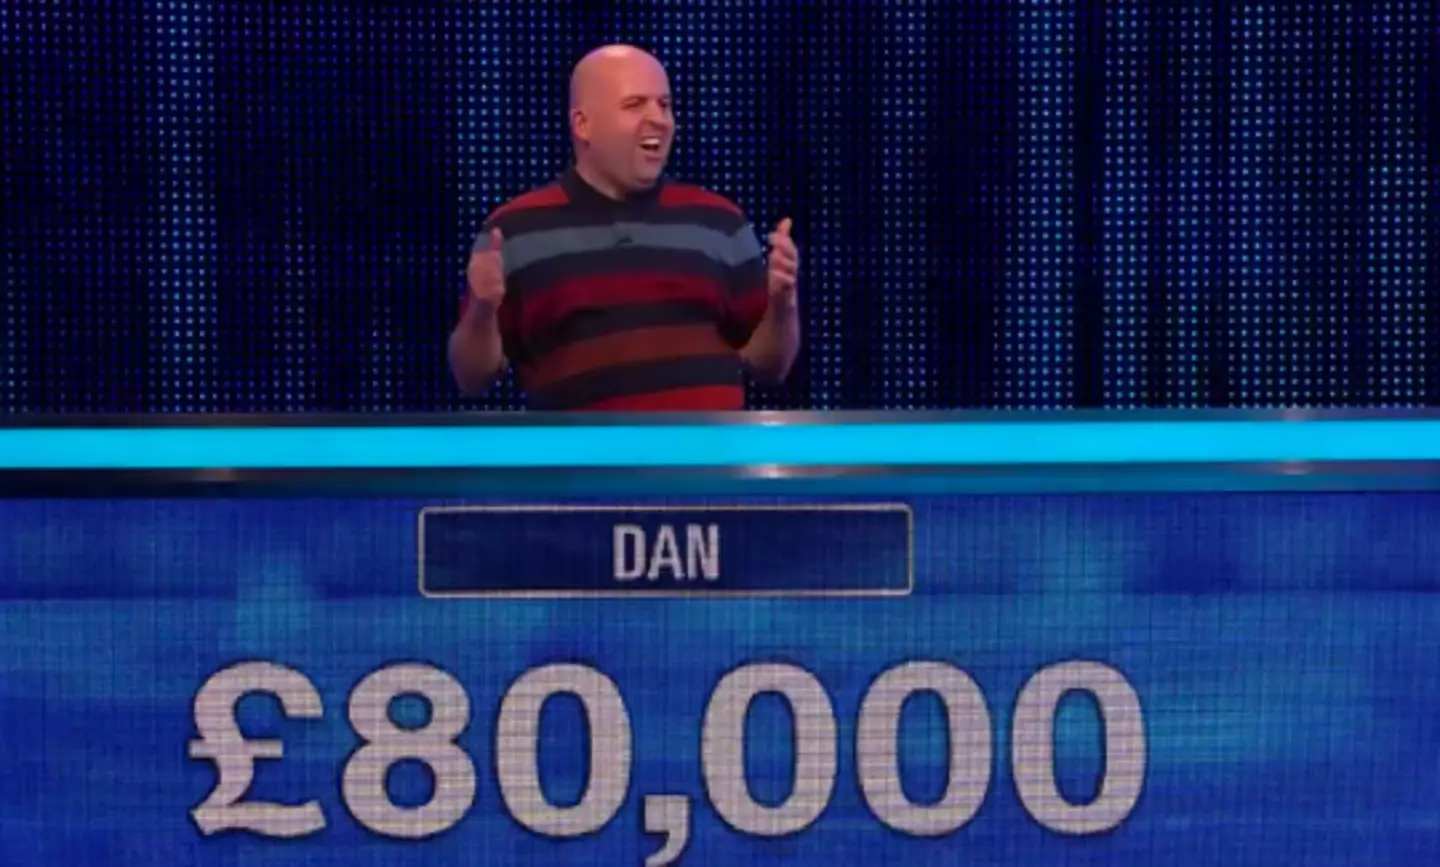 Dan absolutely smashed it.